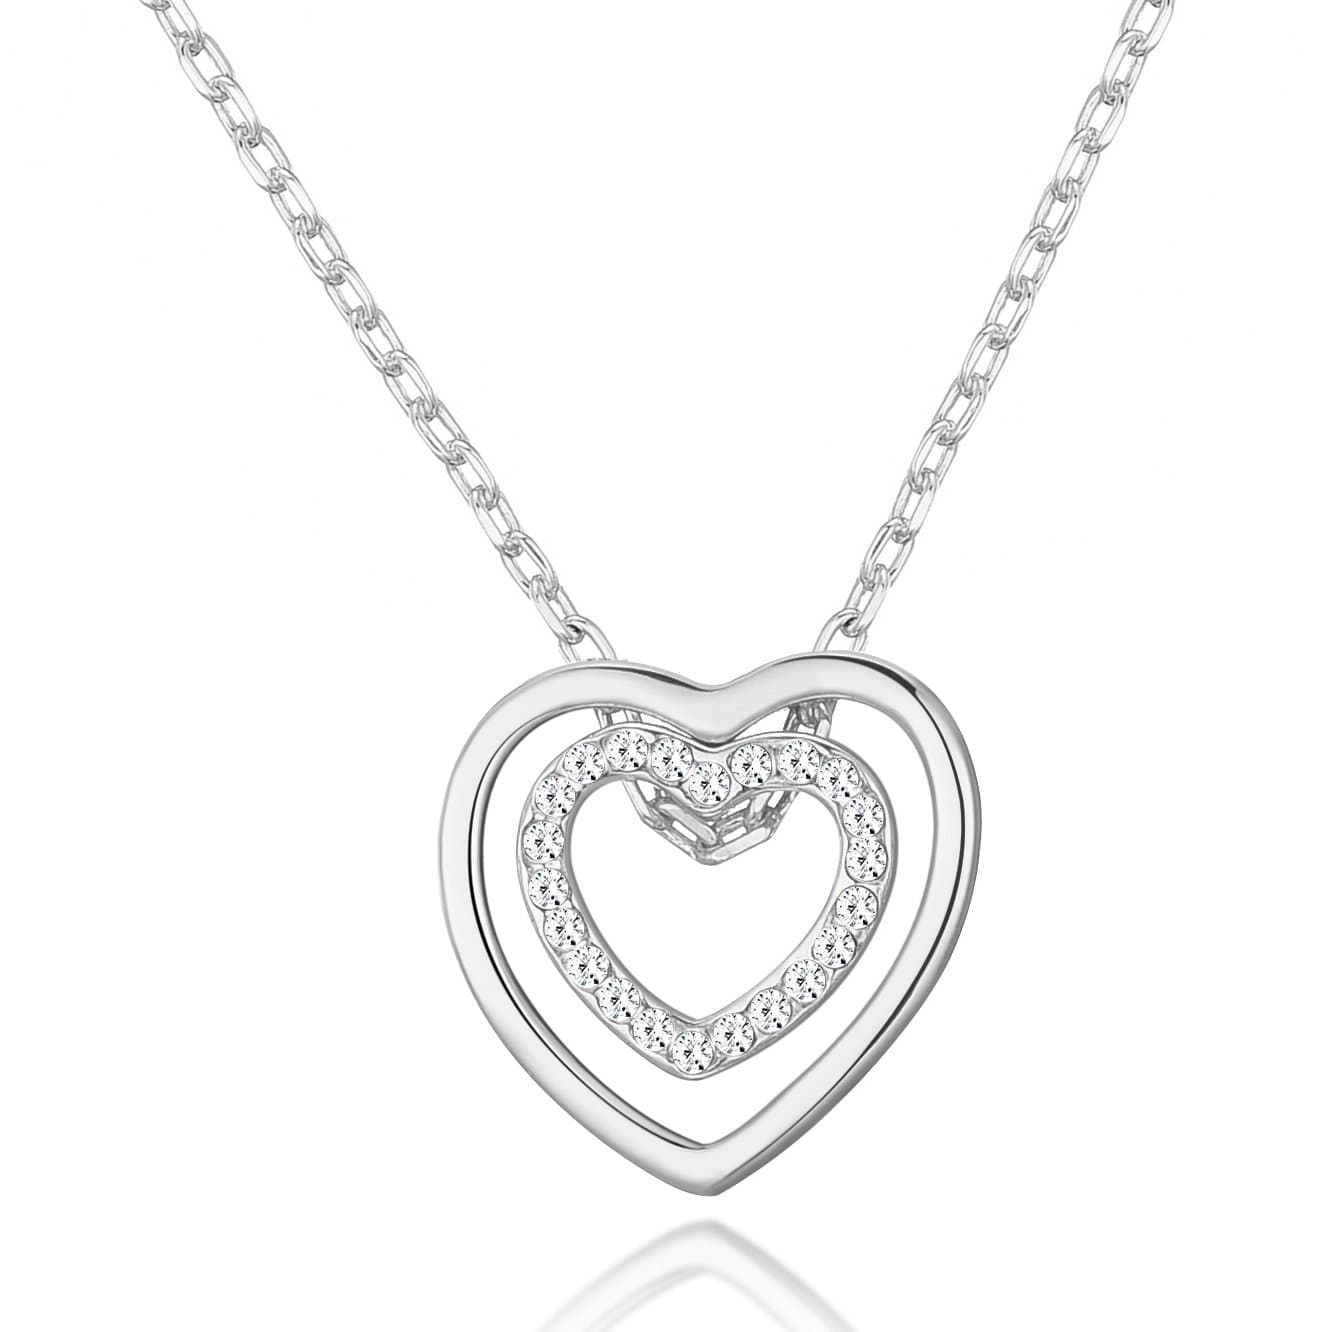 Silver Plated Double Heart Necklace Created with Zircondia® Crystals by Philip Jones Jewellery